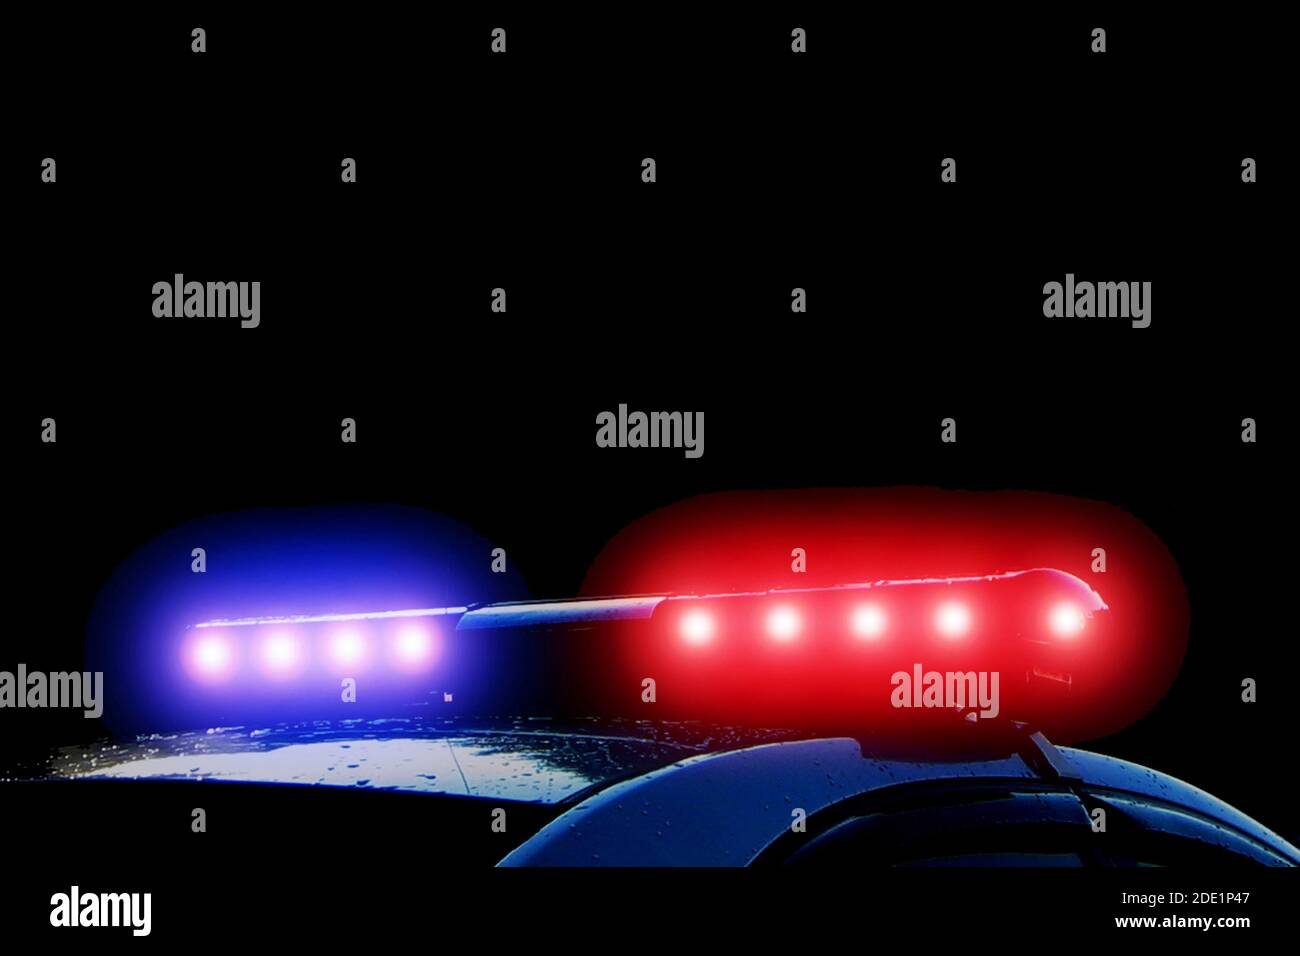 Police car with red and blue flashing lights on street at night time, crime scene. Emergency vehicle lights flashing Stock Photo